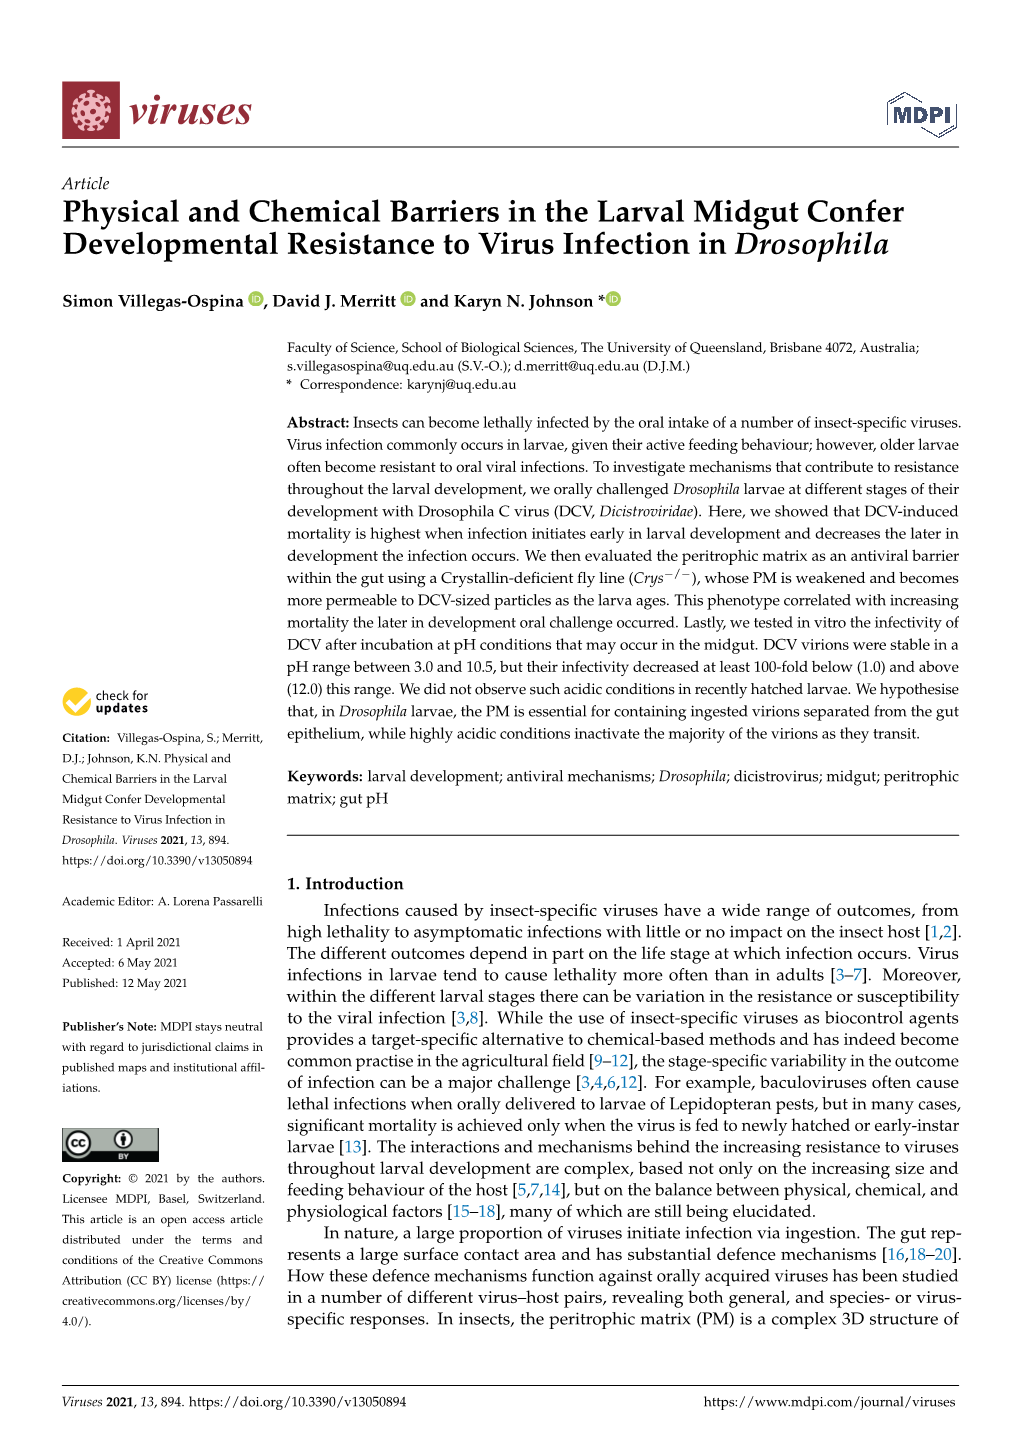 Physical and Chemical Barriers in the Larval Midgut Confer Developmental Resistance to Virus Infection in Drosophila